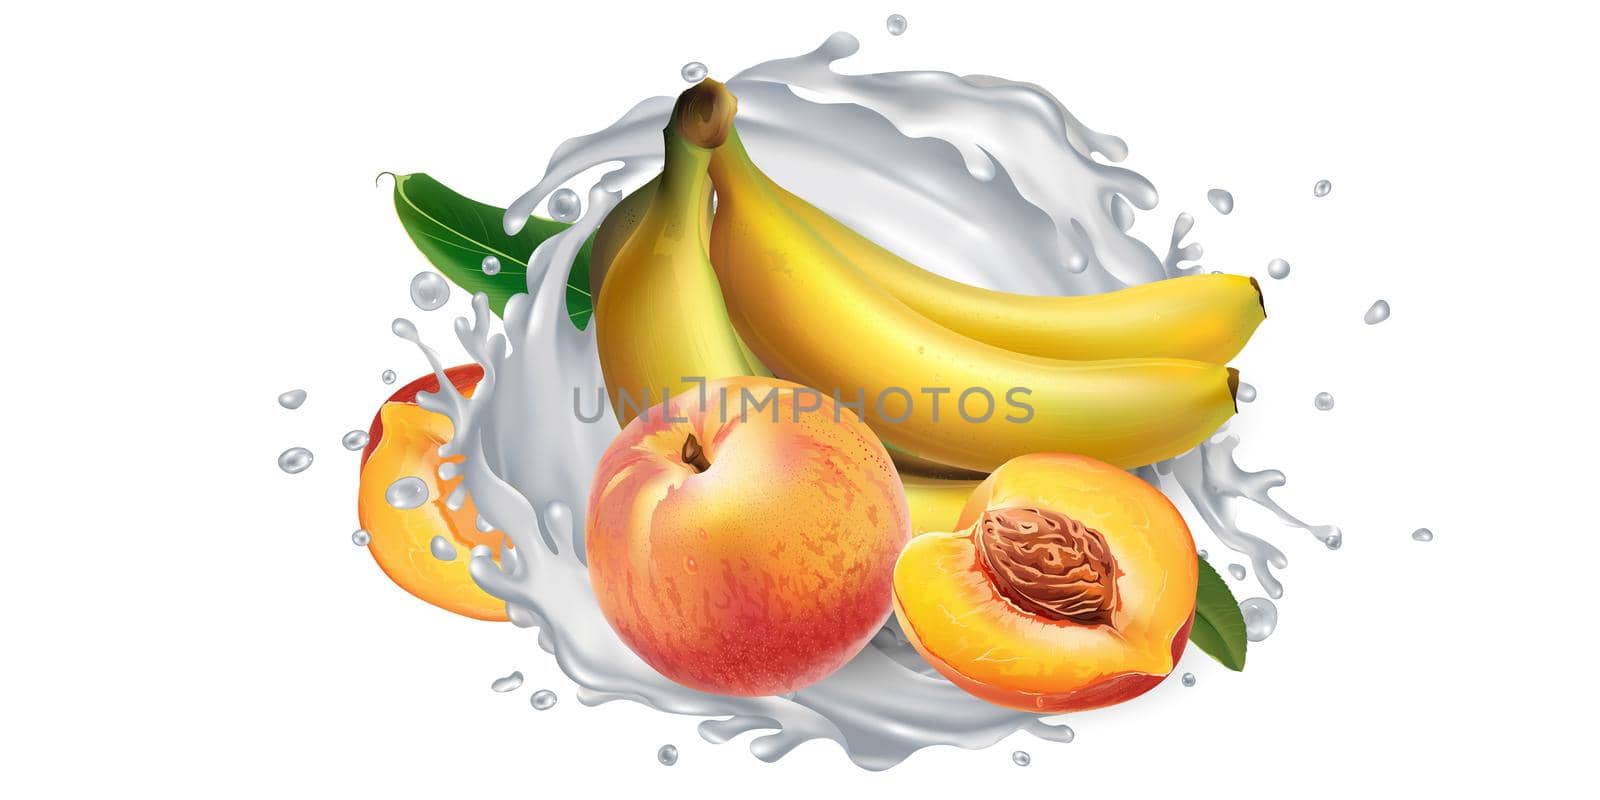 Bananas and peaches in a milk or yogurt splash. by ConceptCafe